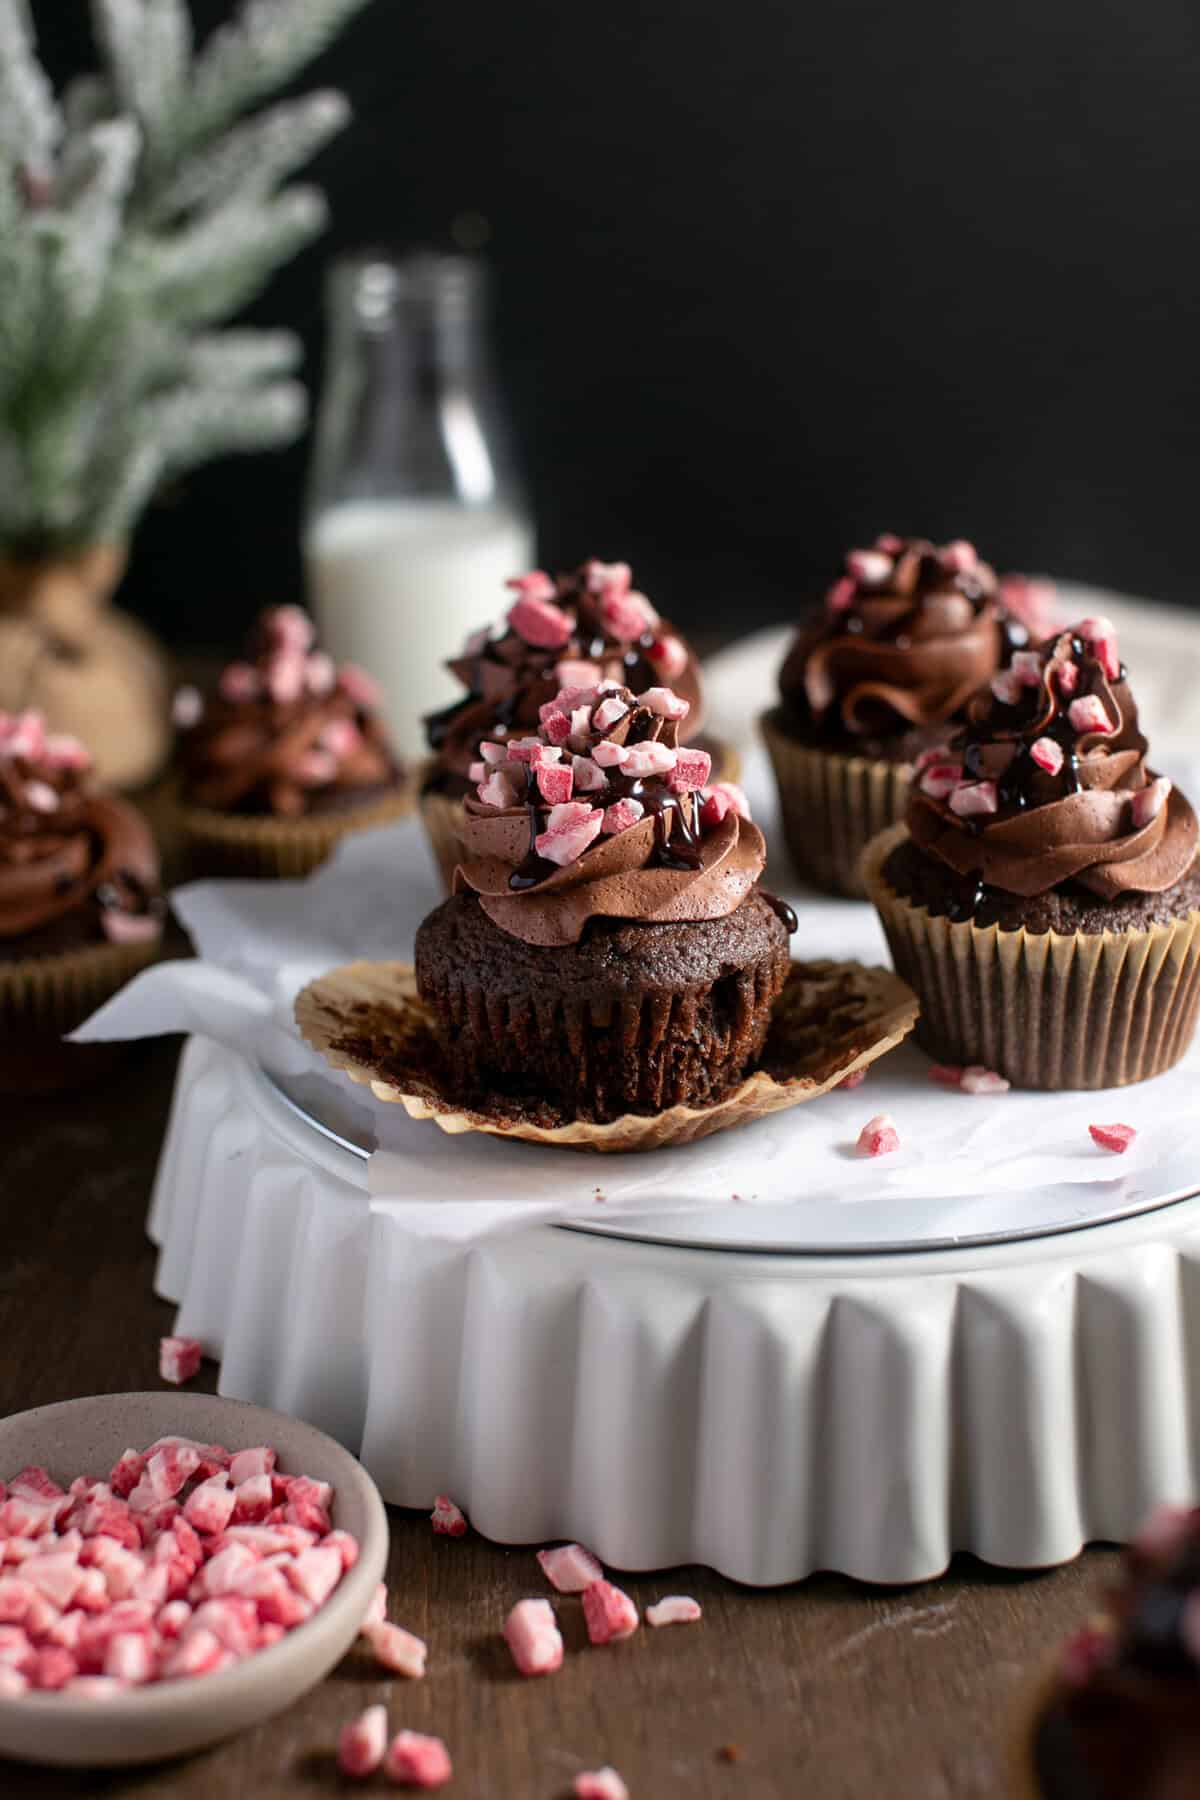 Peppermint Mocha Cupcakes with cupcake liner unwrapped.